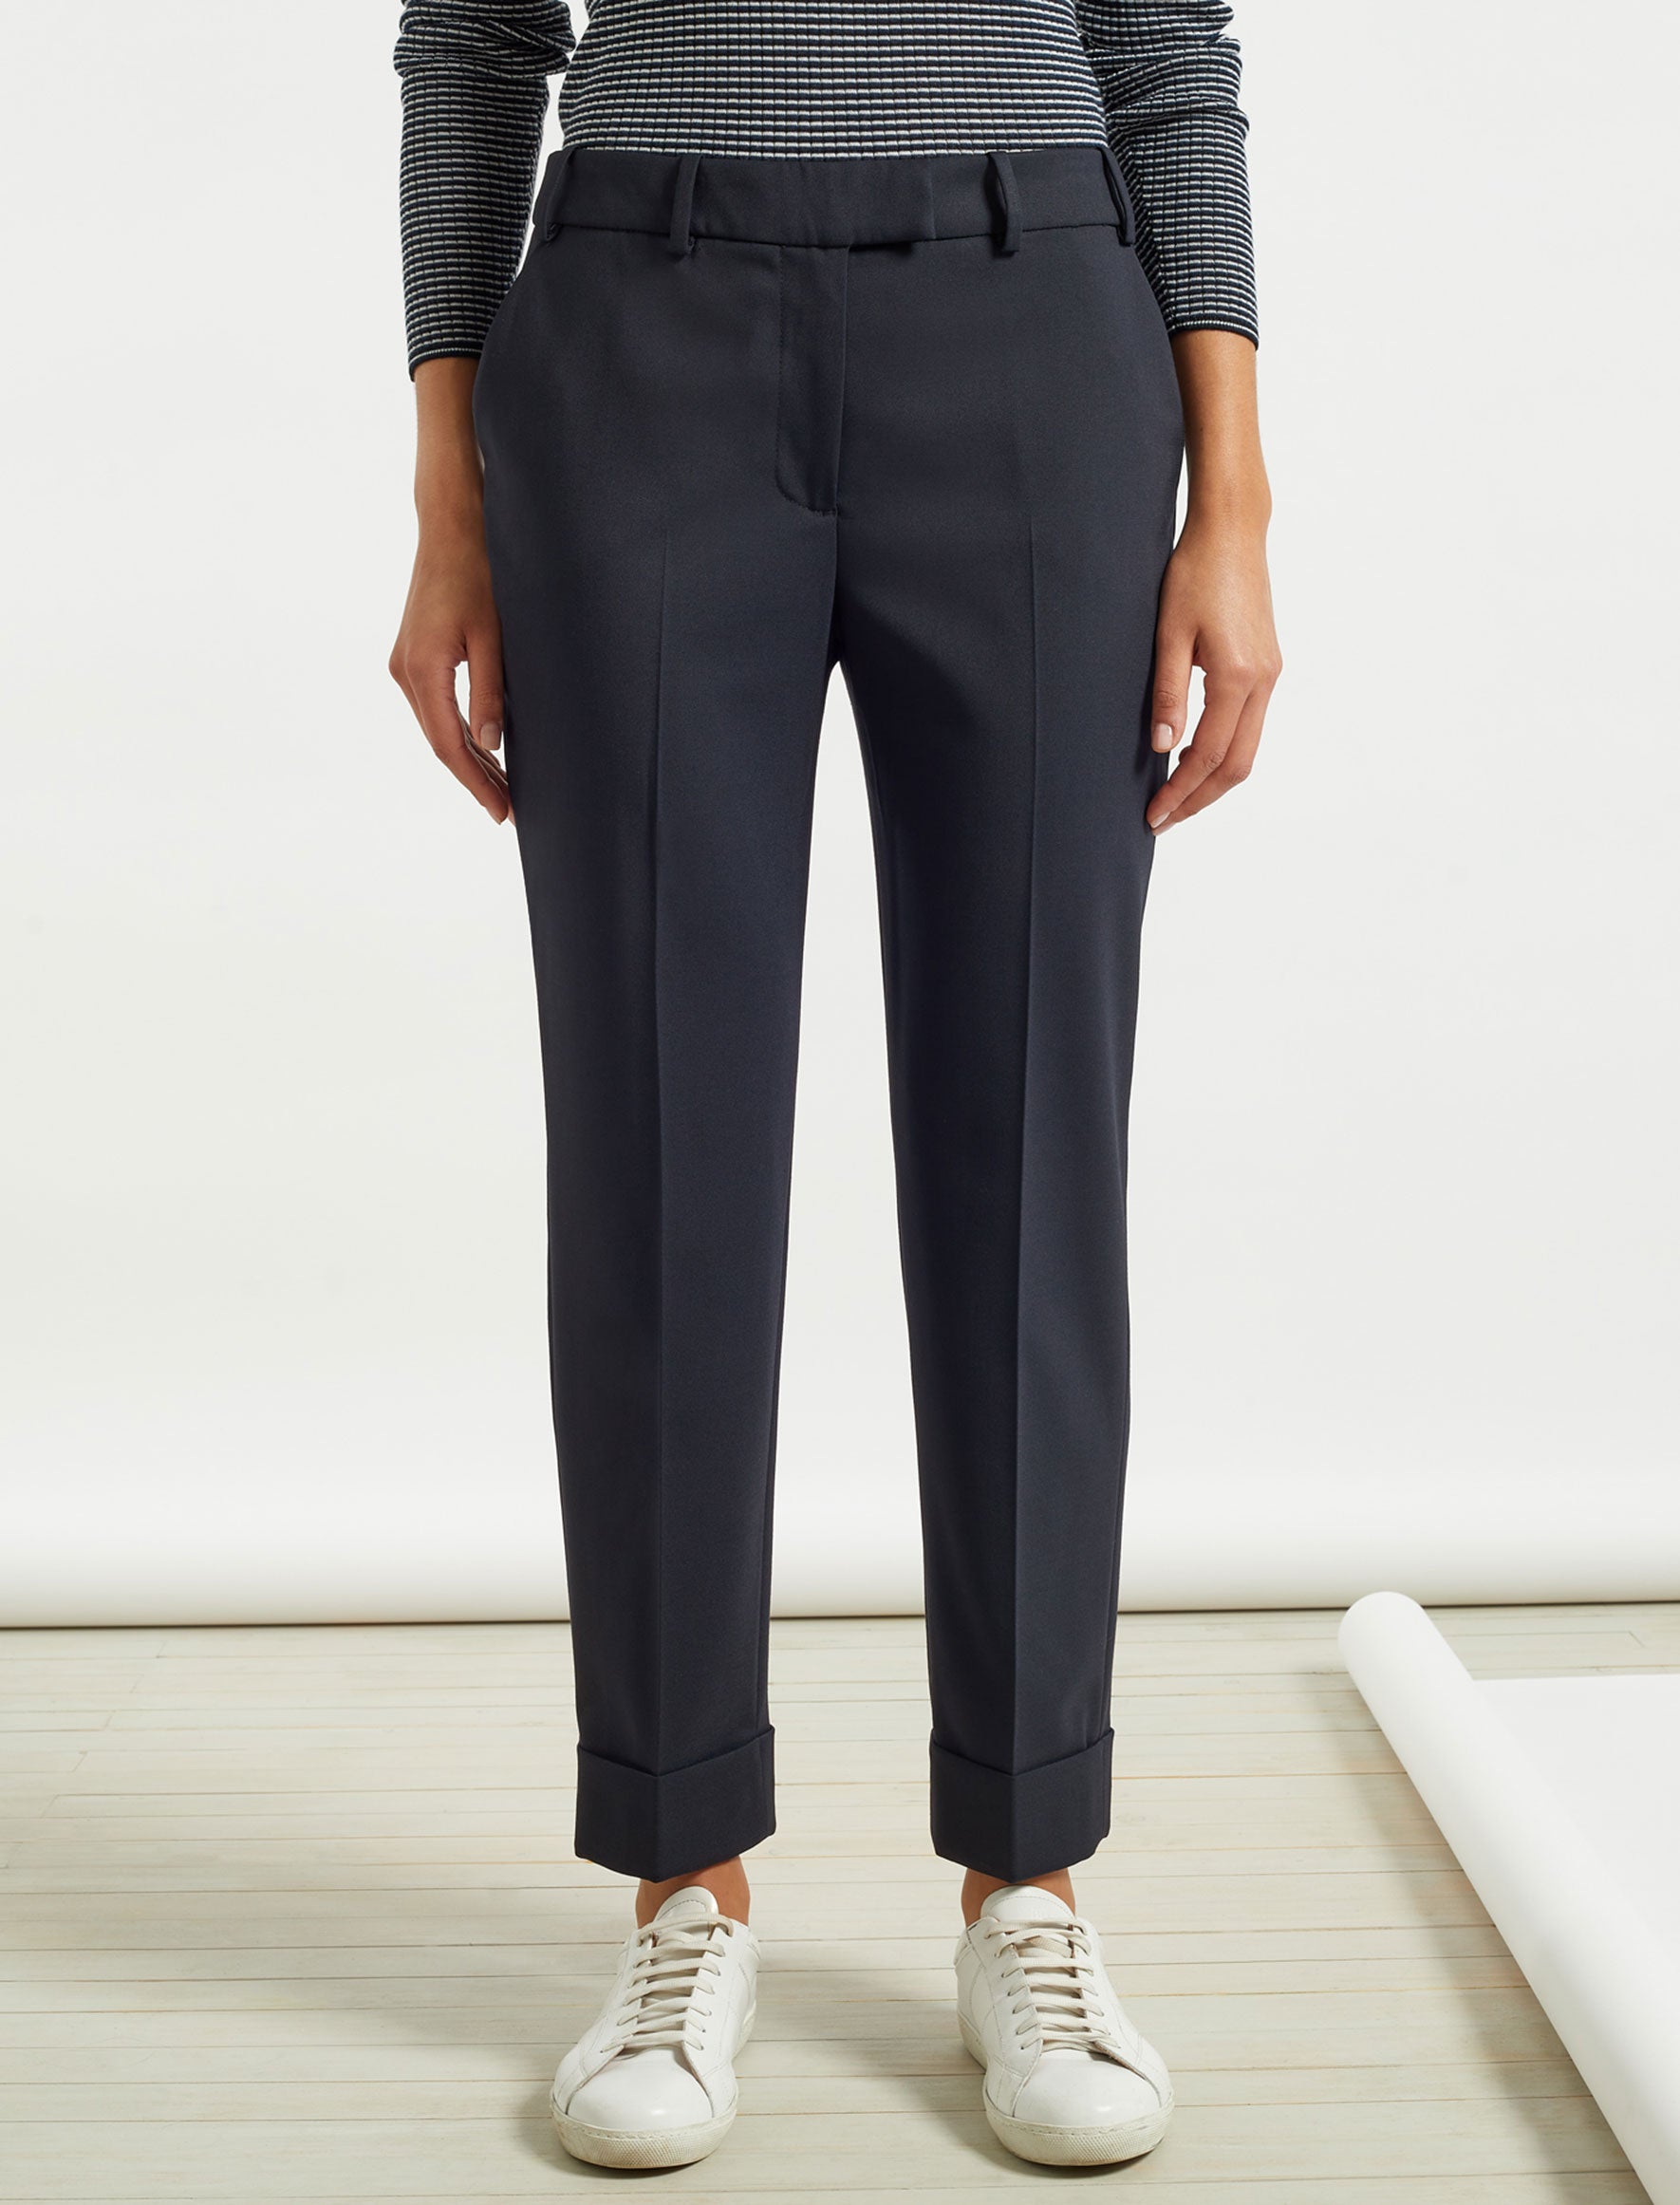 Clement Navy Turn Up Wool Blend Trousers | Navy Wool Blend Trousers ...